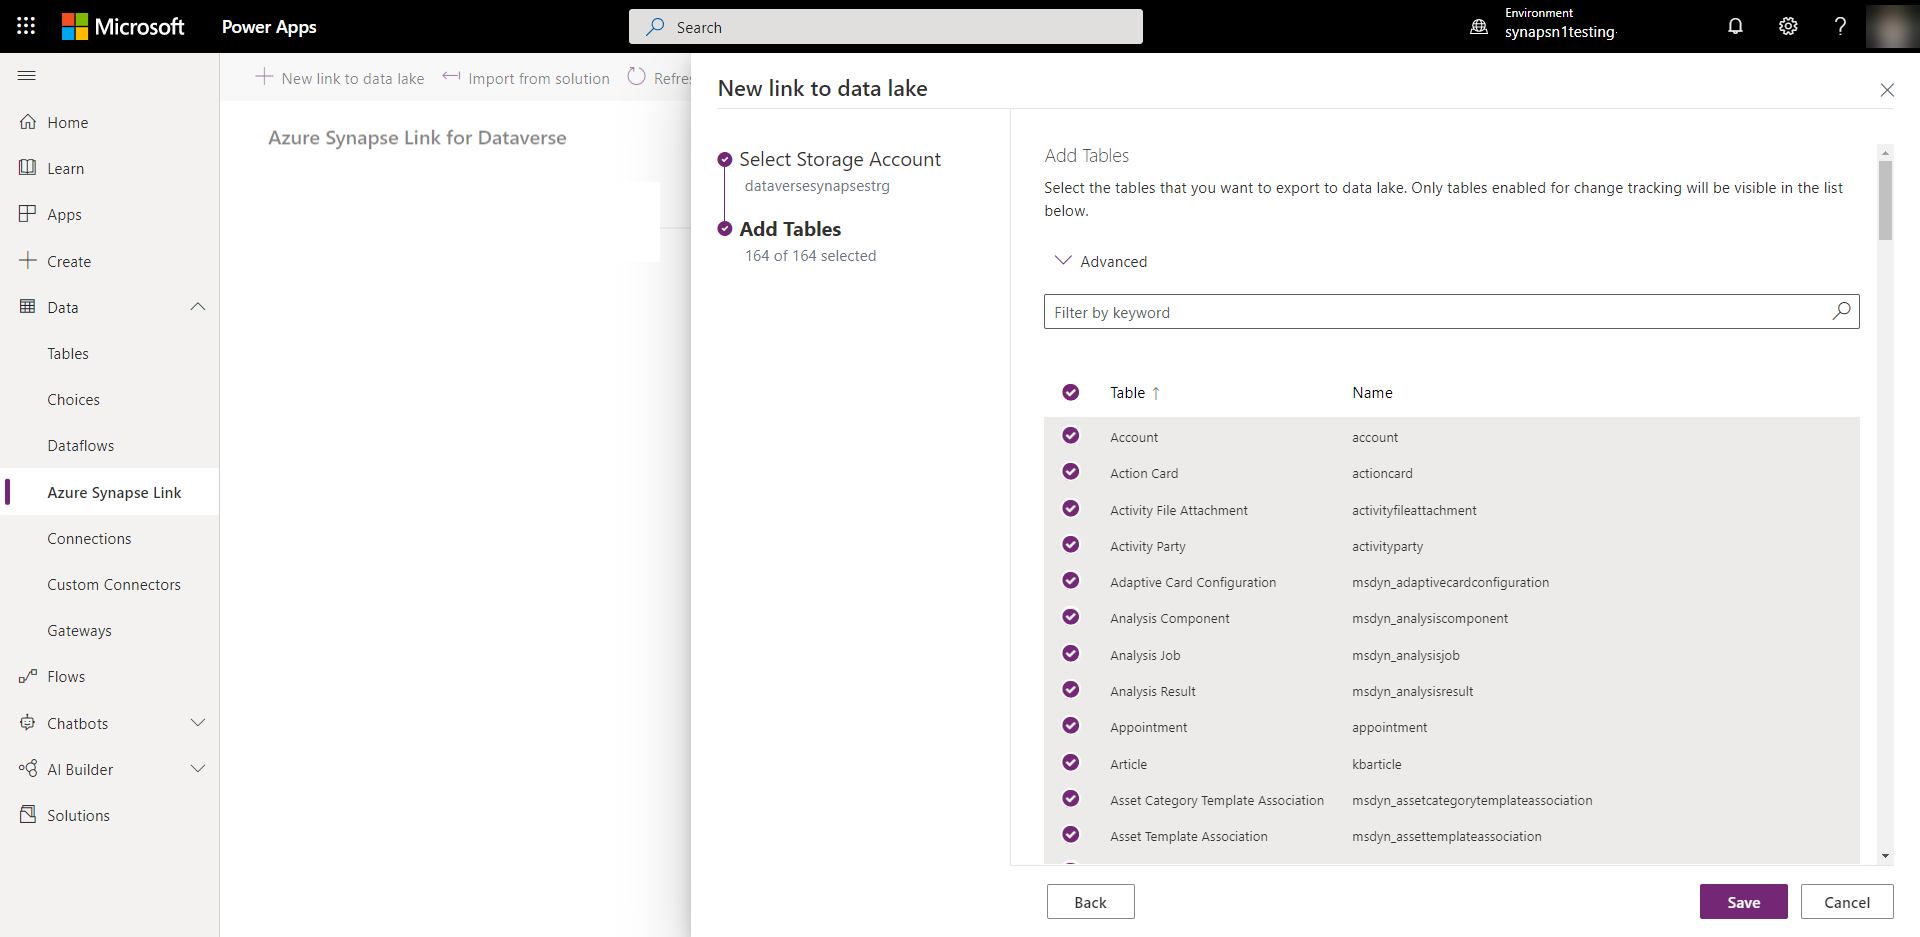 Select the Dataverse Tables with the data you want to push to Azure Synapse